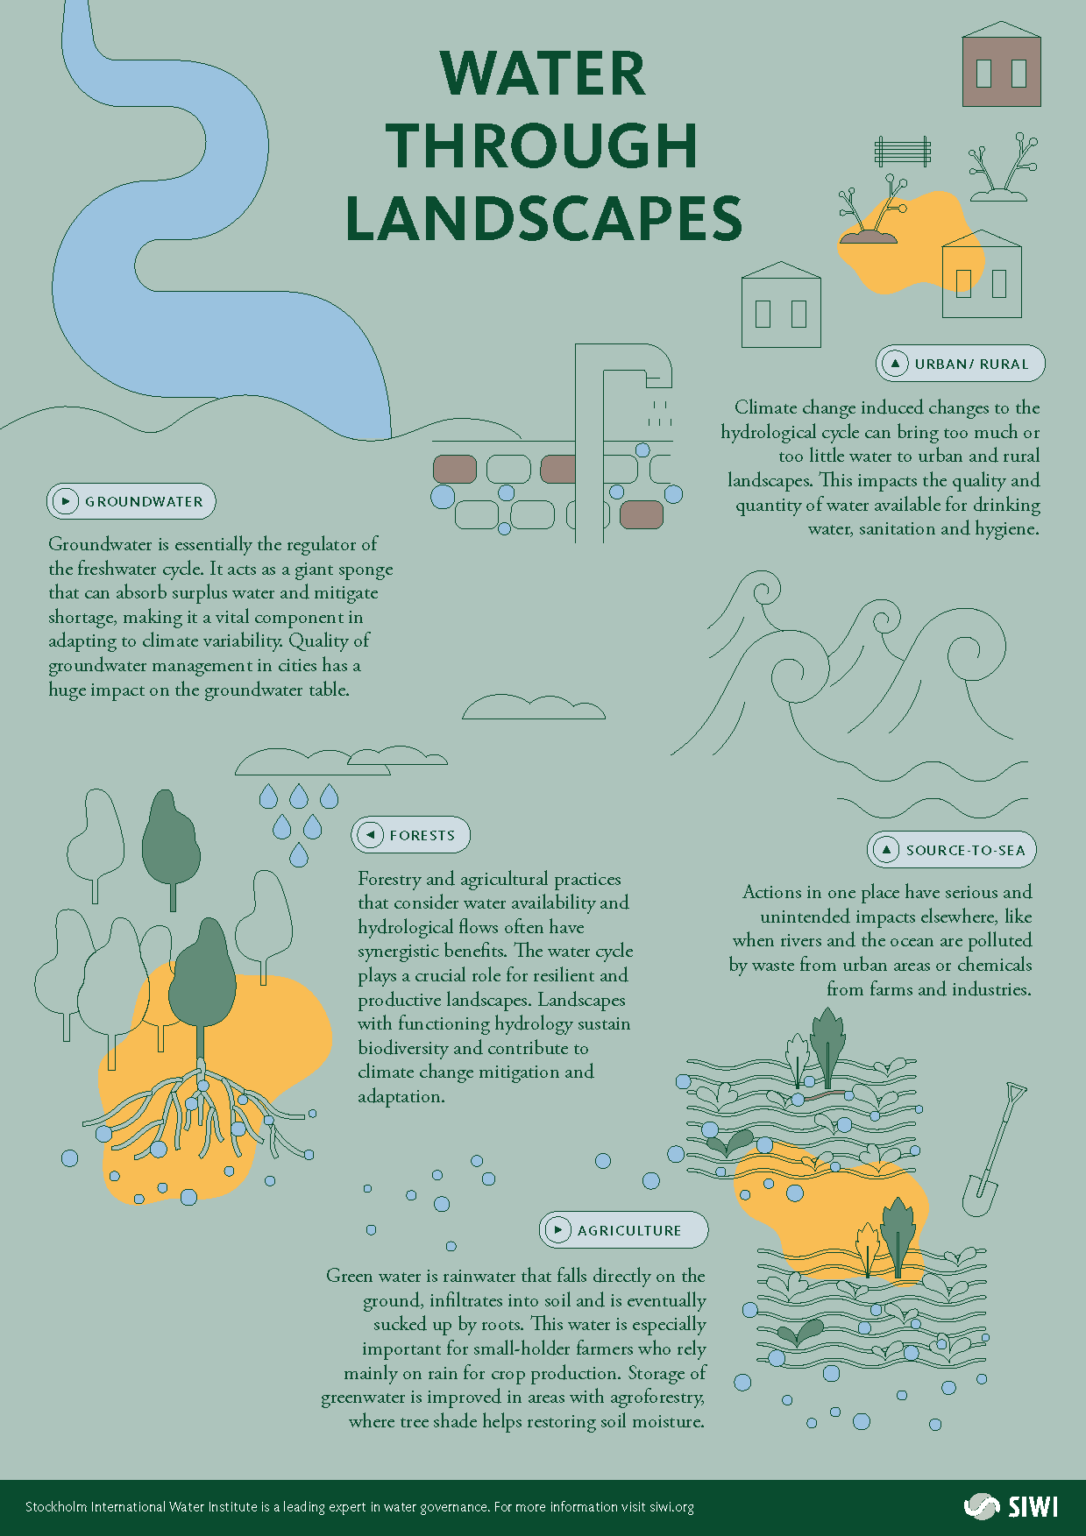 Water through landscape - one page